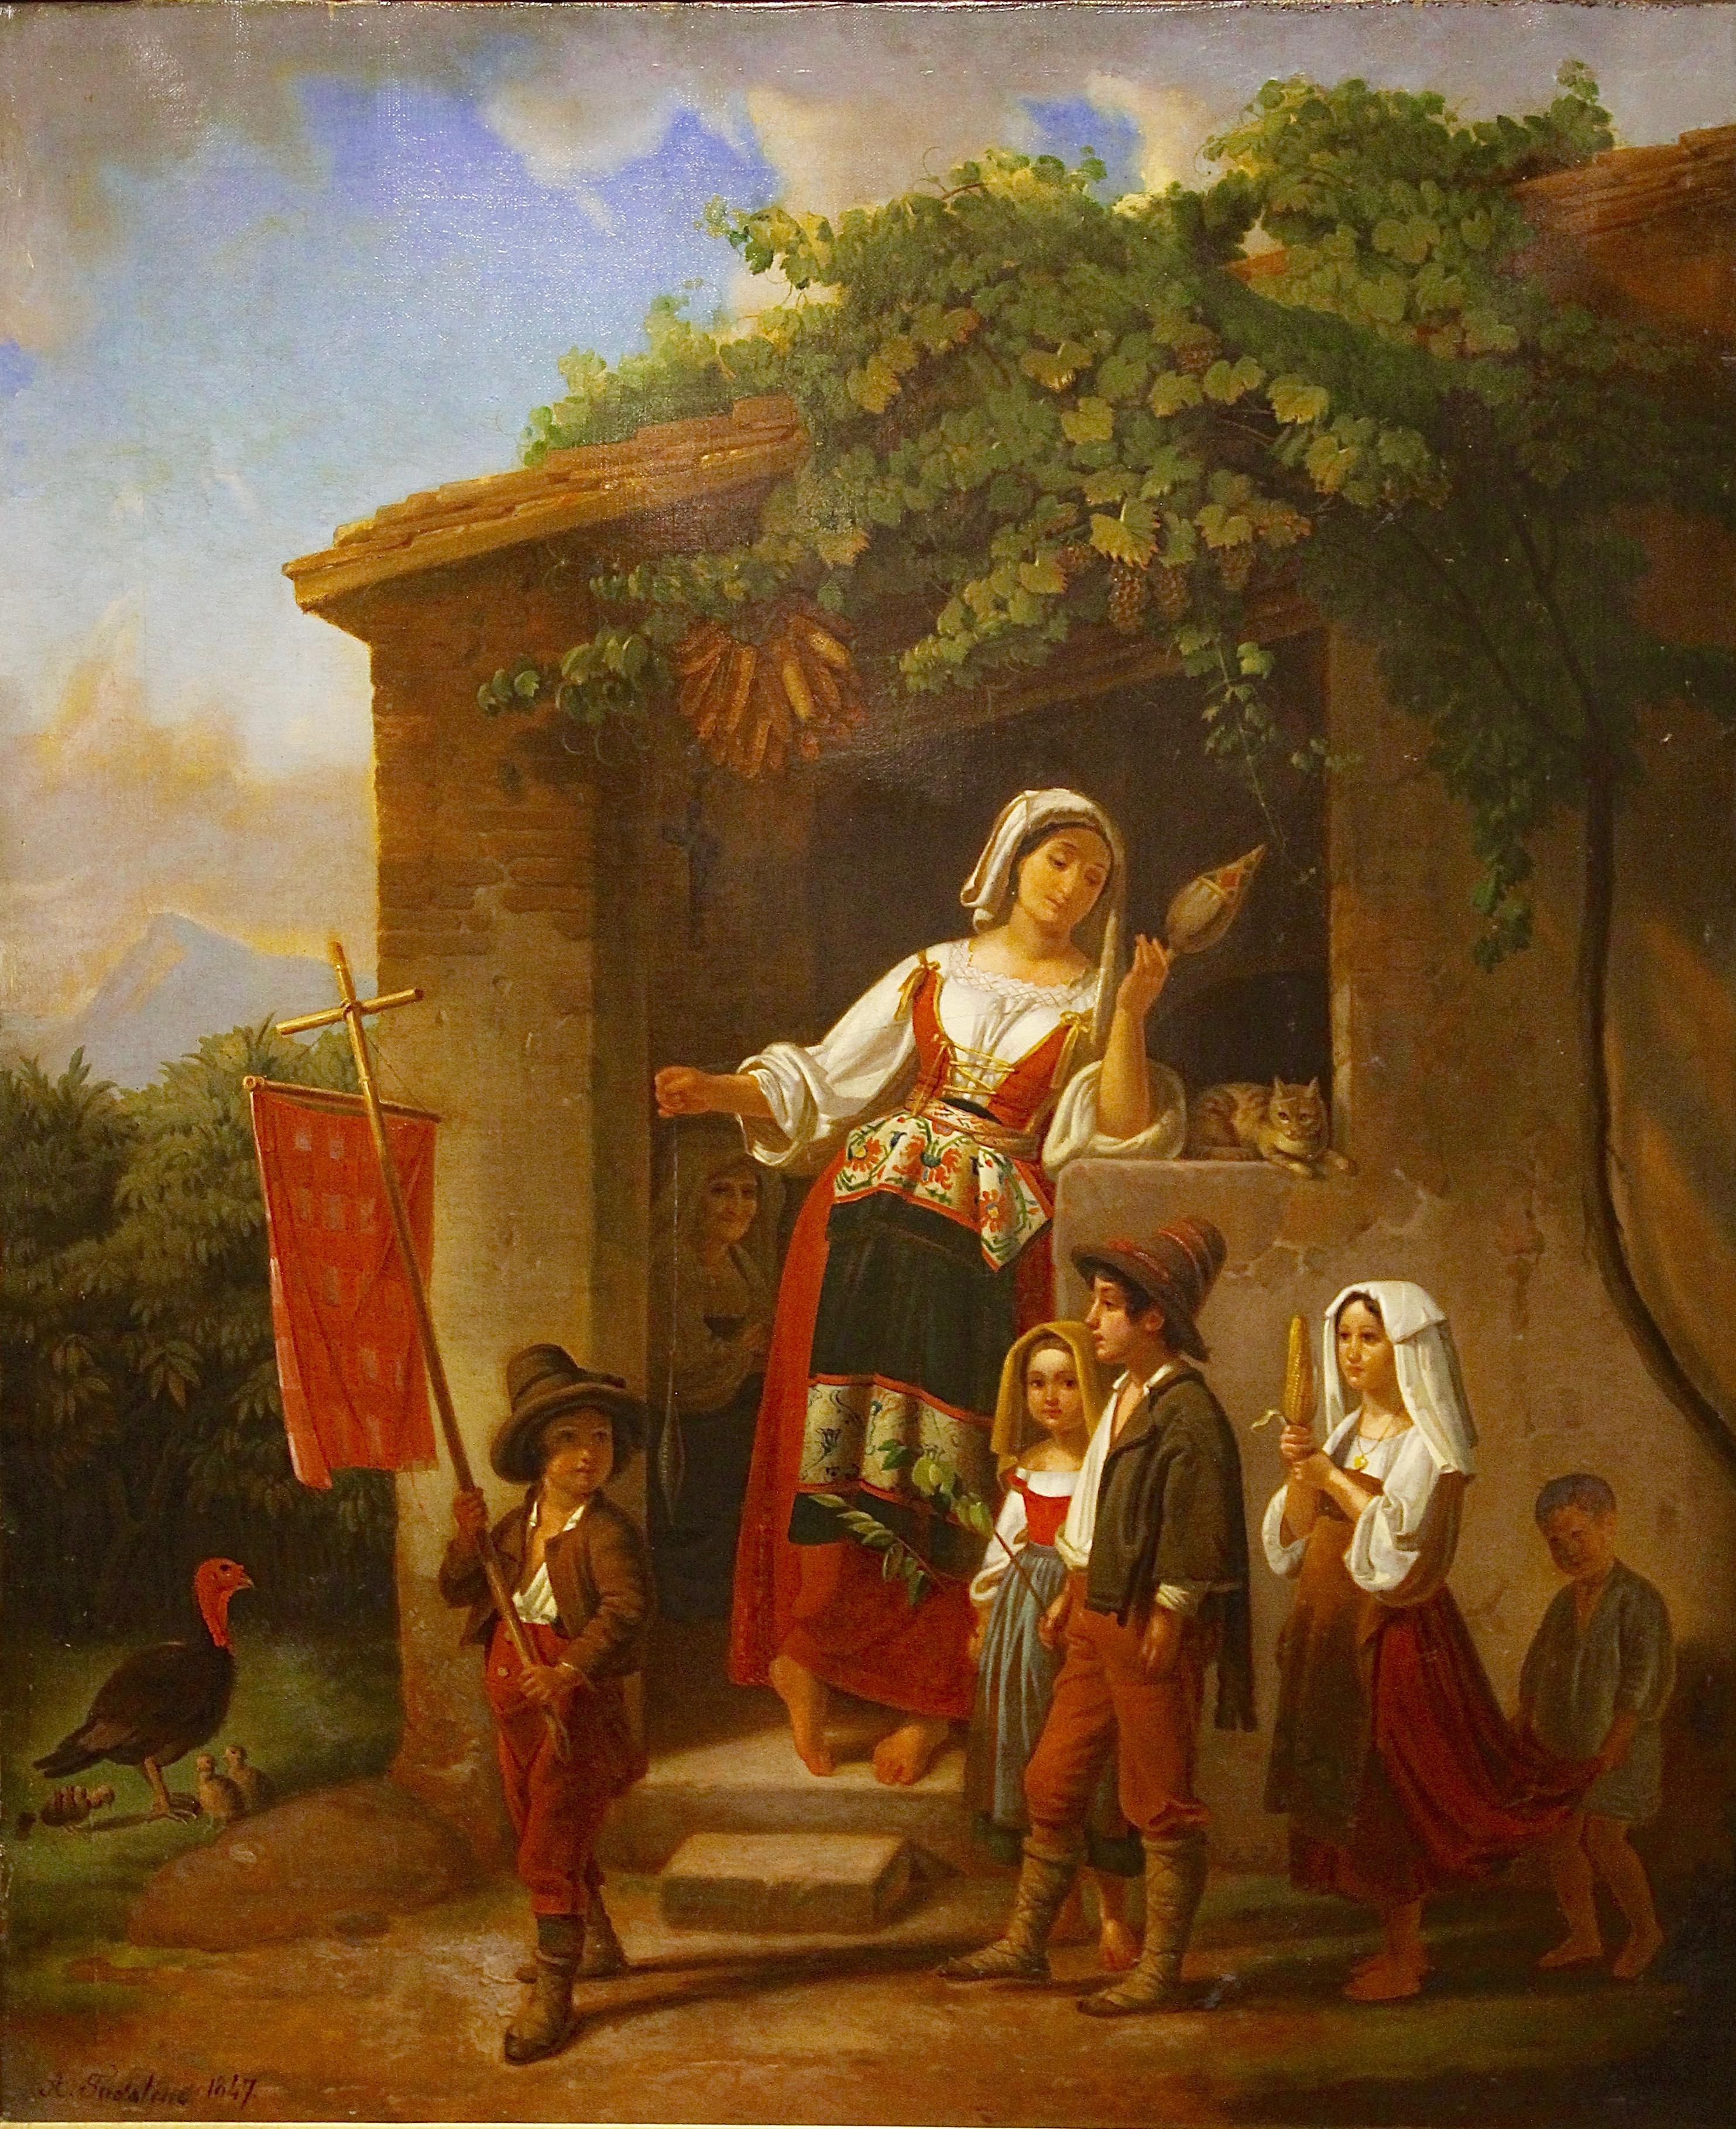 Unknown Figurative Painting - Antique oil painting. Oil on canvas. 19th century. "The ceremony". Dated, 1847.